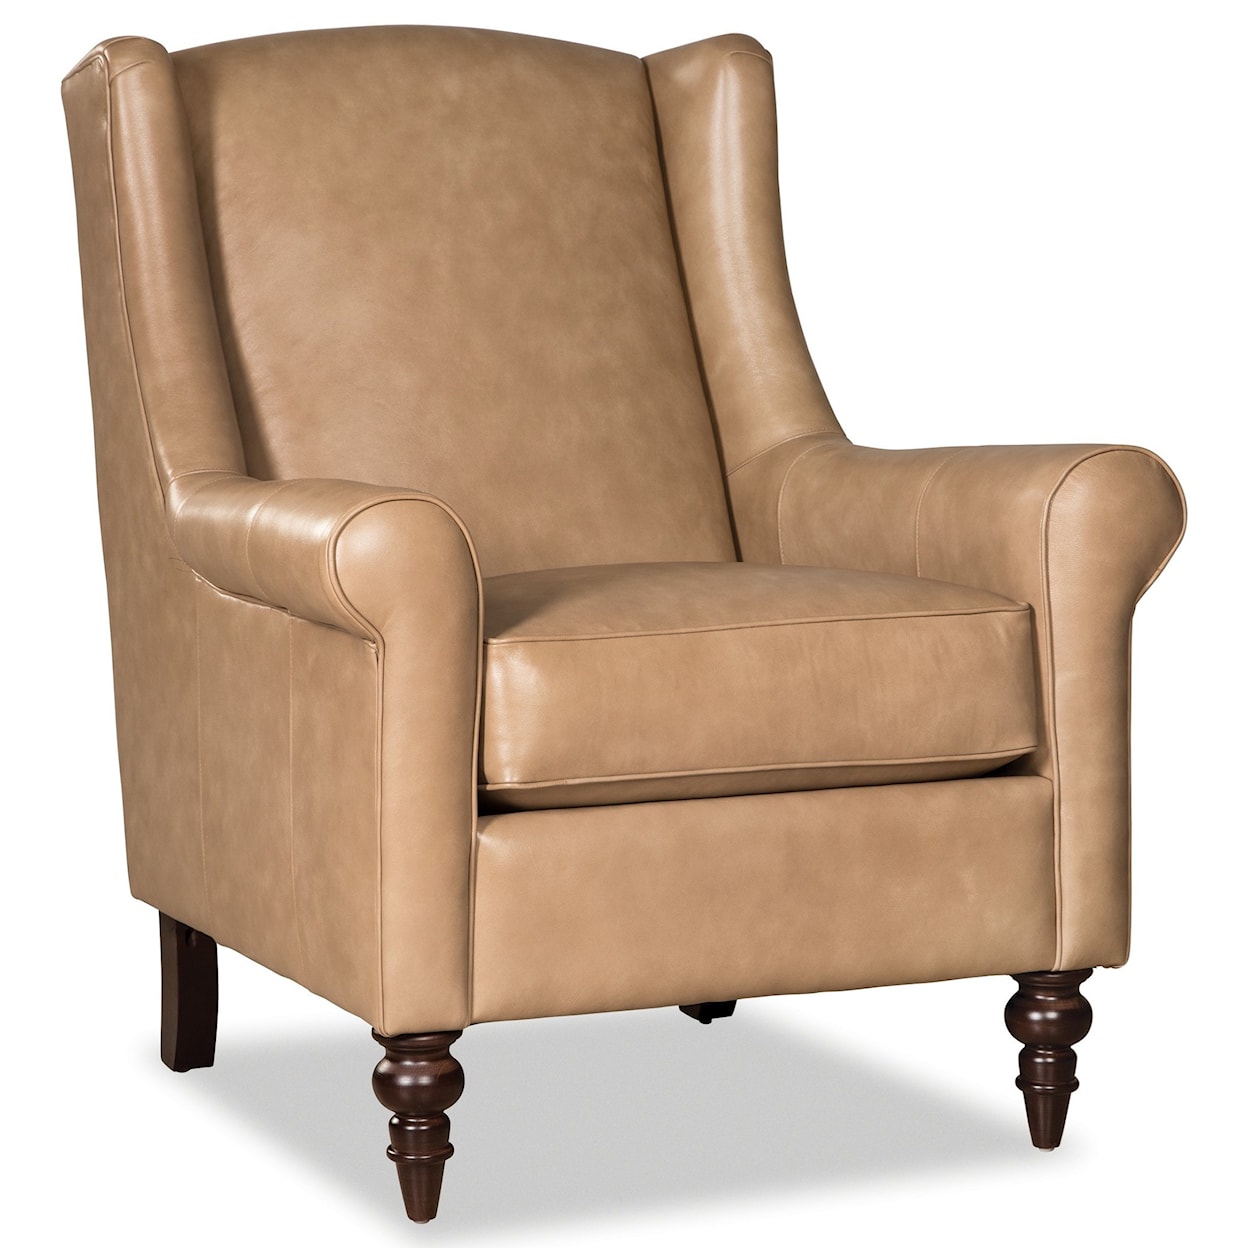 Craftmaster L058710 Chair